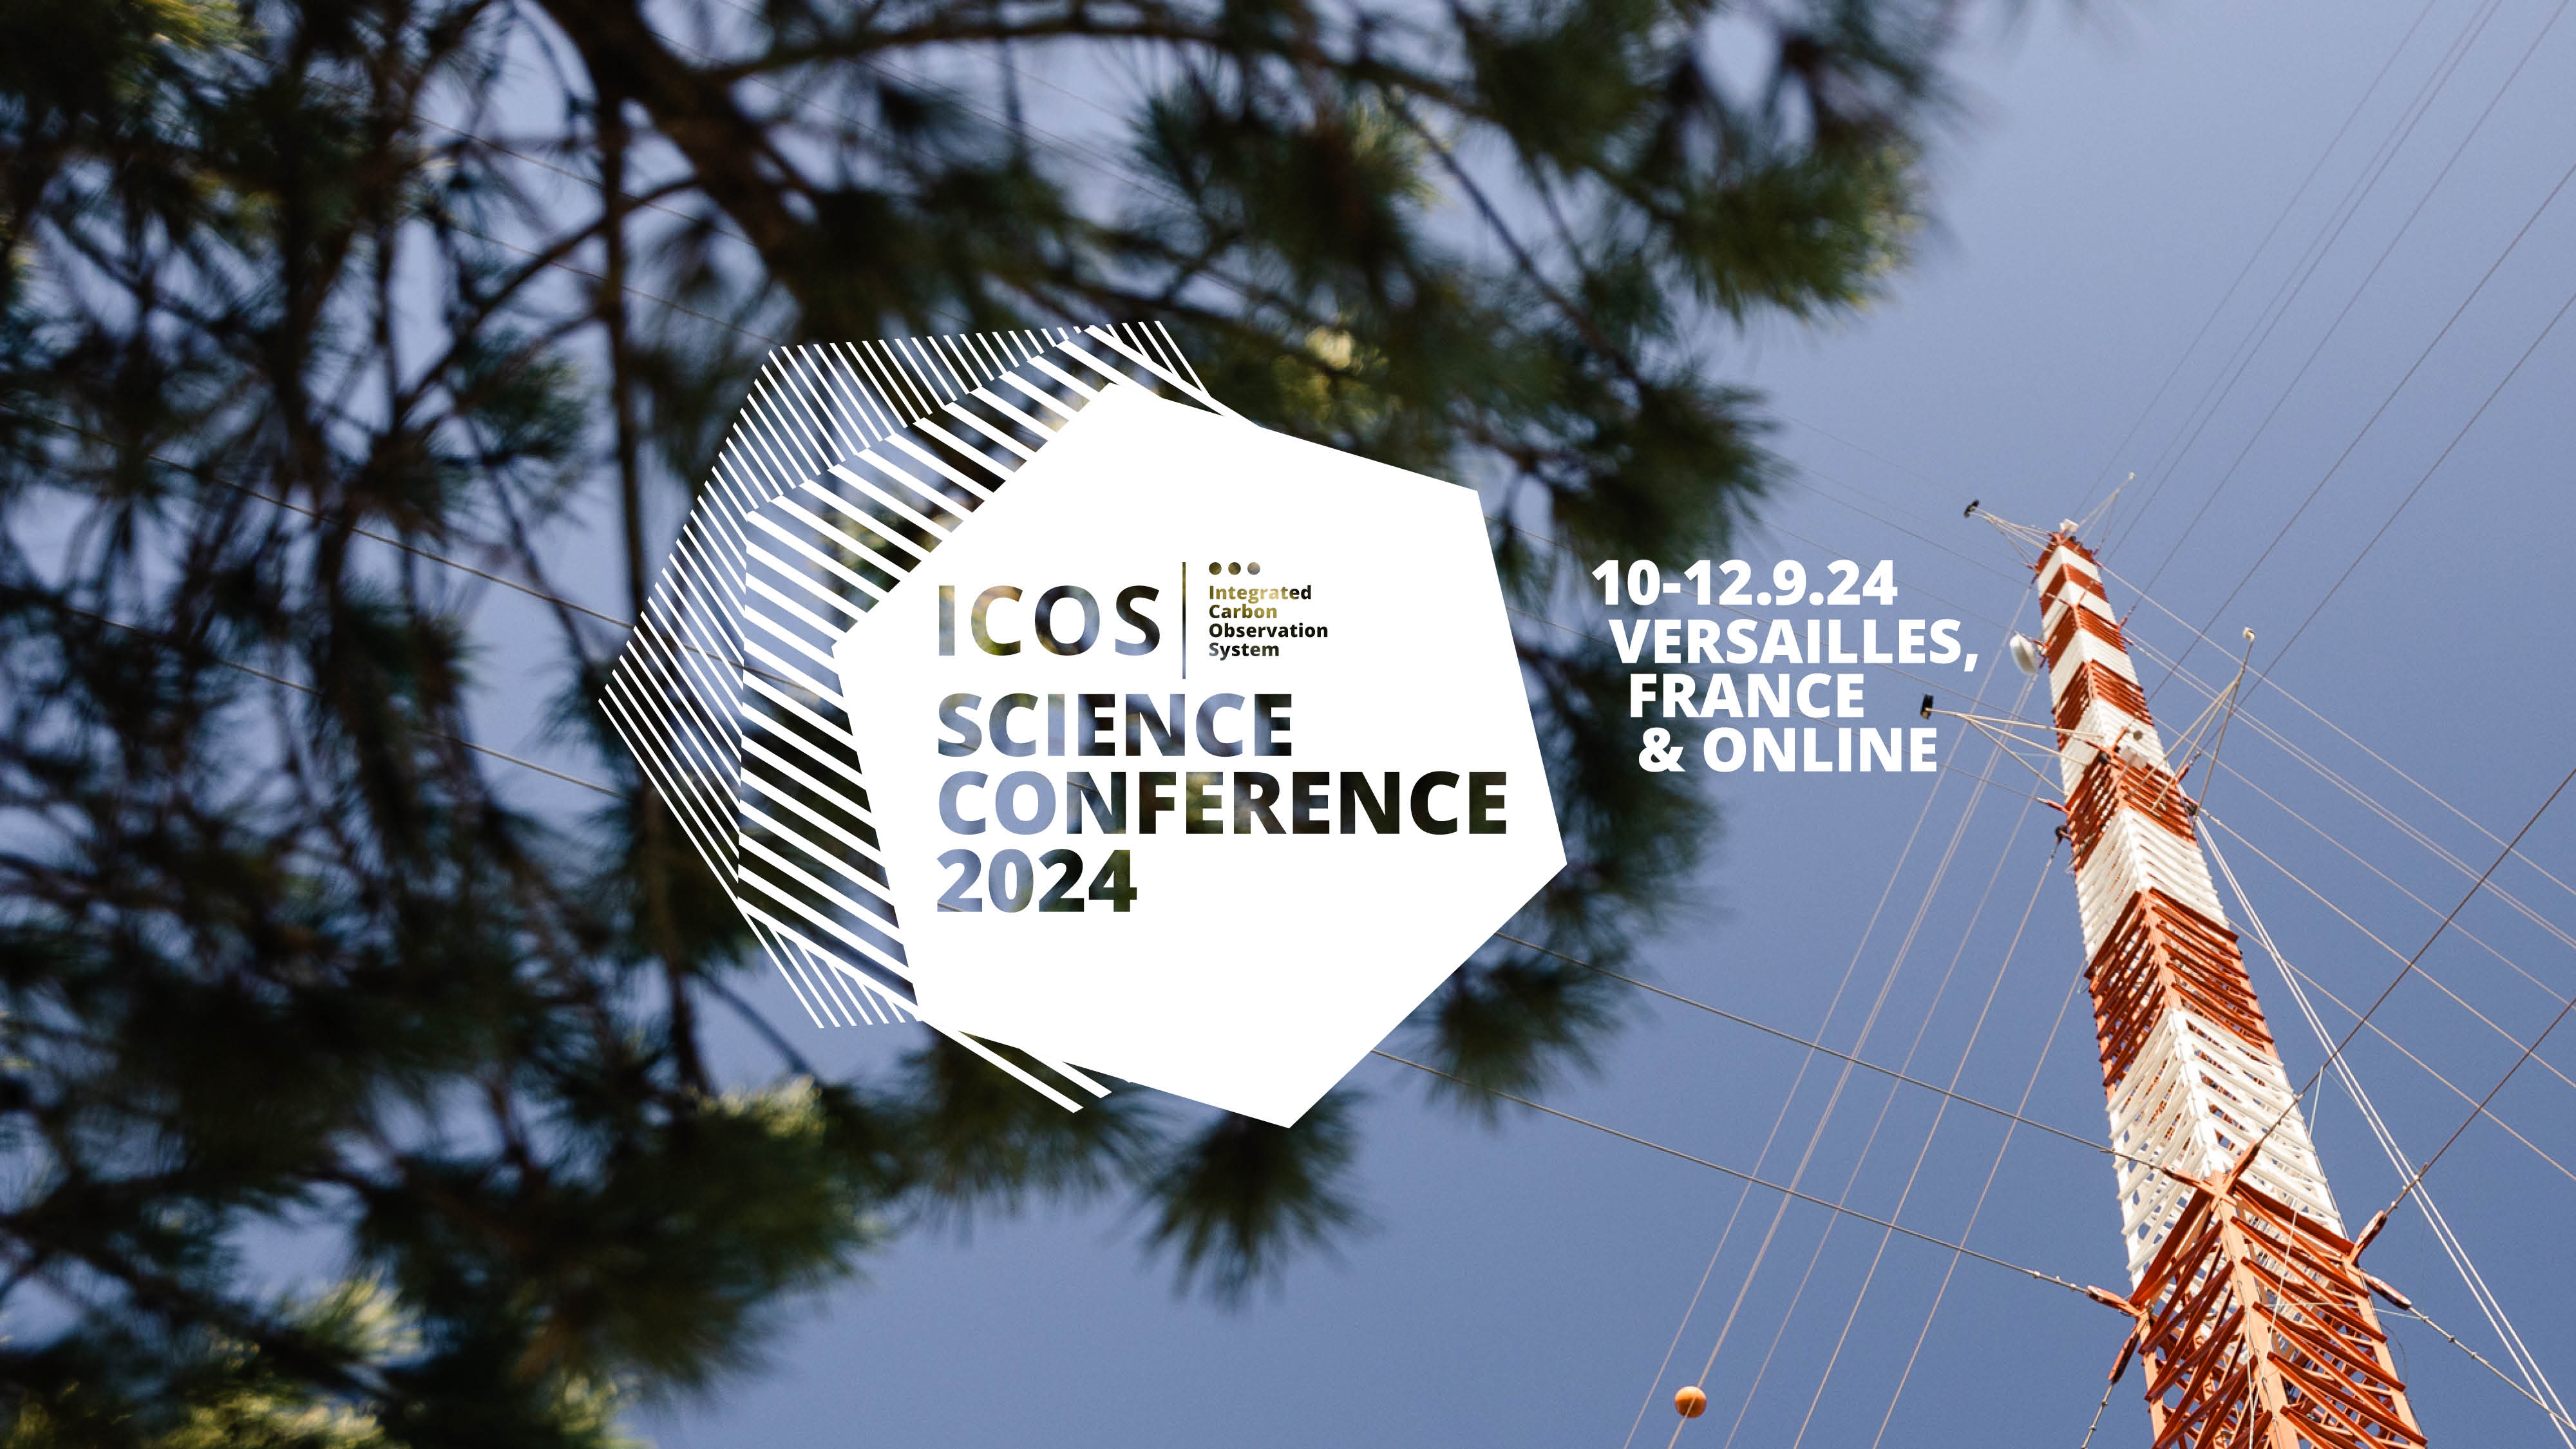 Sessions announced for ICOS Science Conference 2024